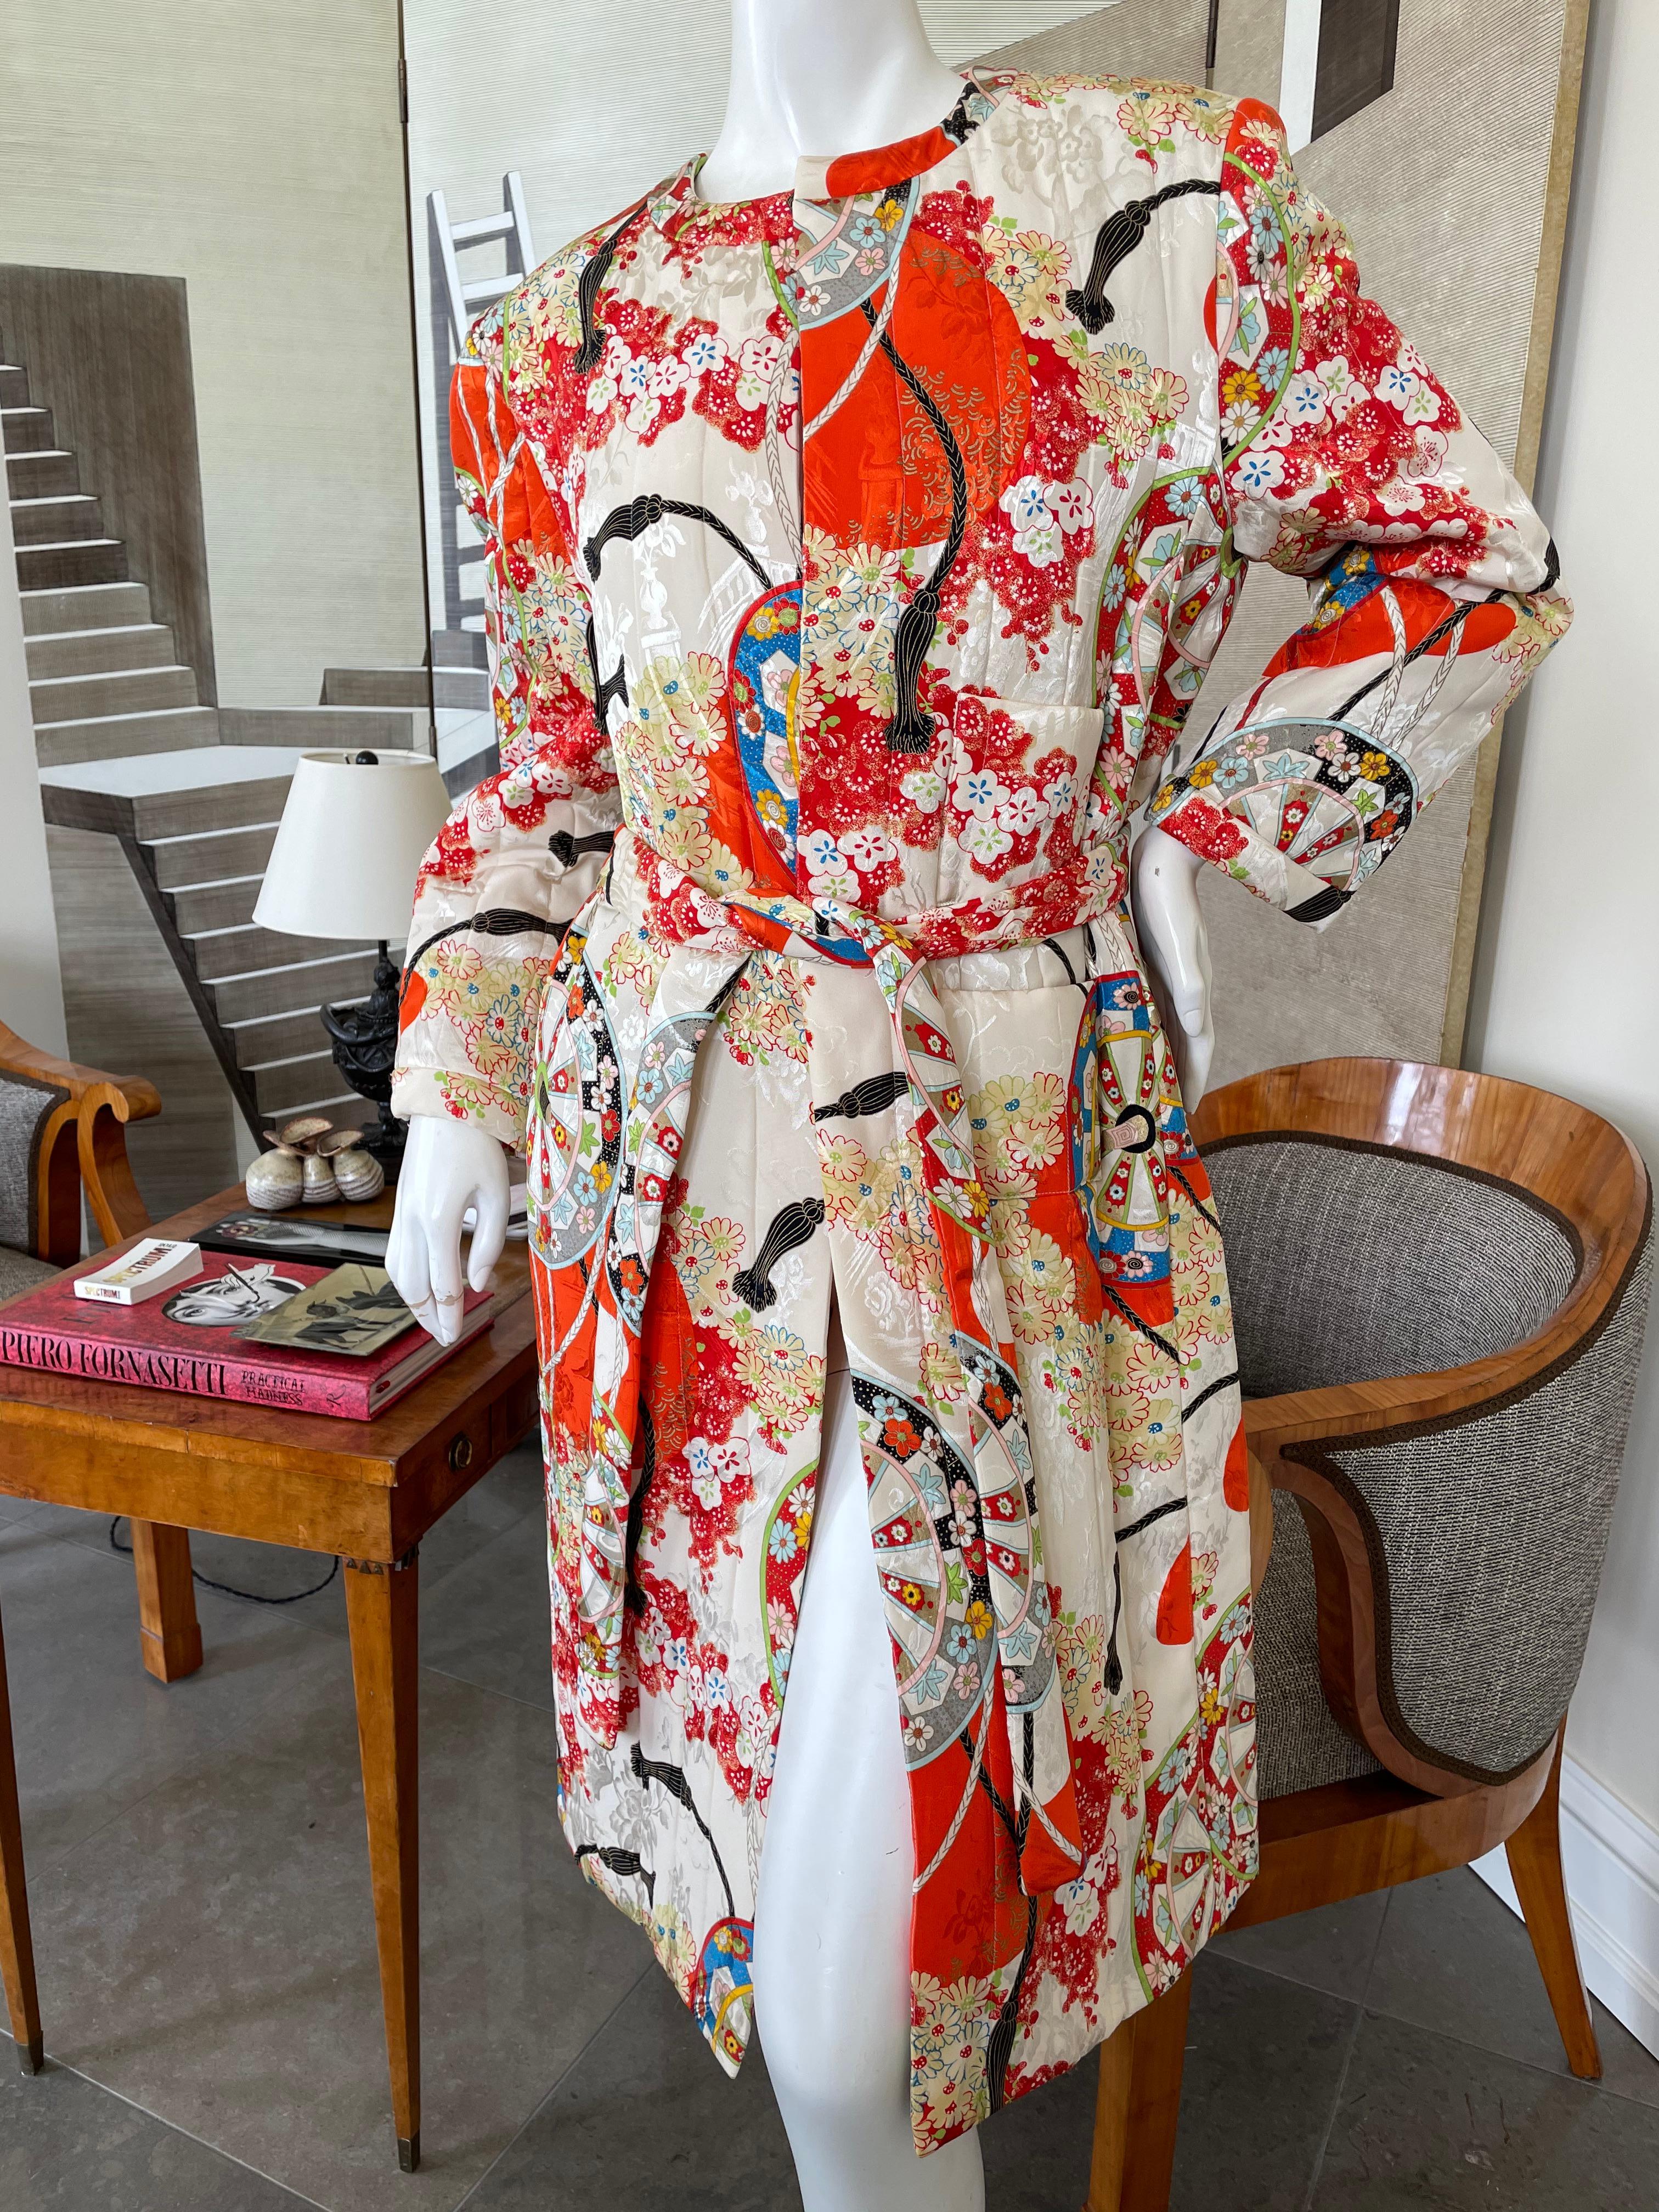 Christian Dior Spring 2001 Colorful Quilted Silk Kimono Coat w Belt by Galliano In Excellent Condition For Sale In Cloverdale, CA